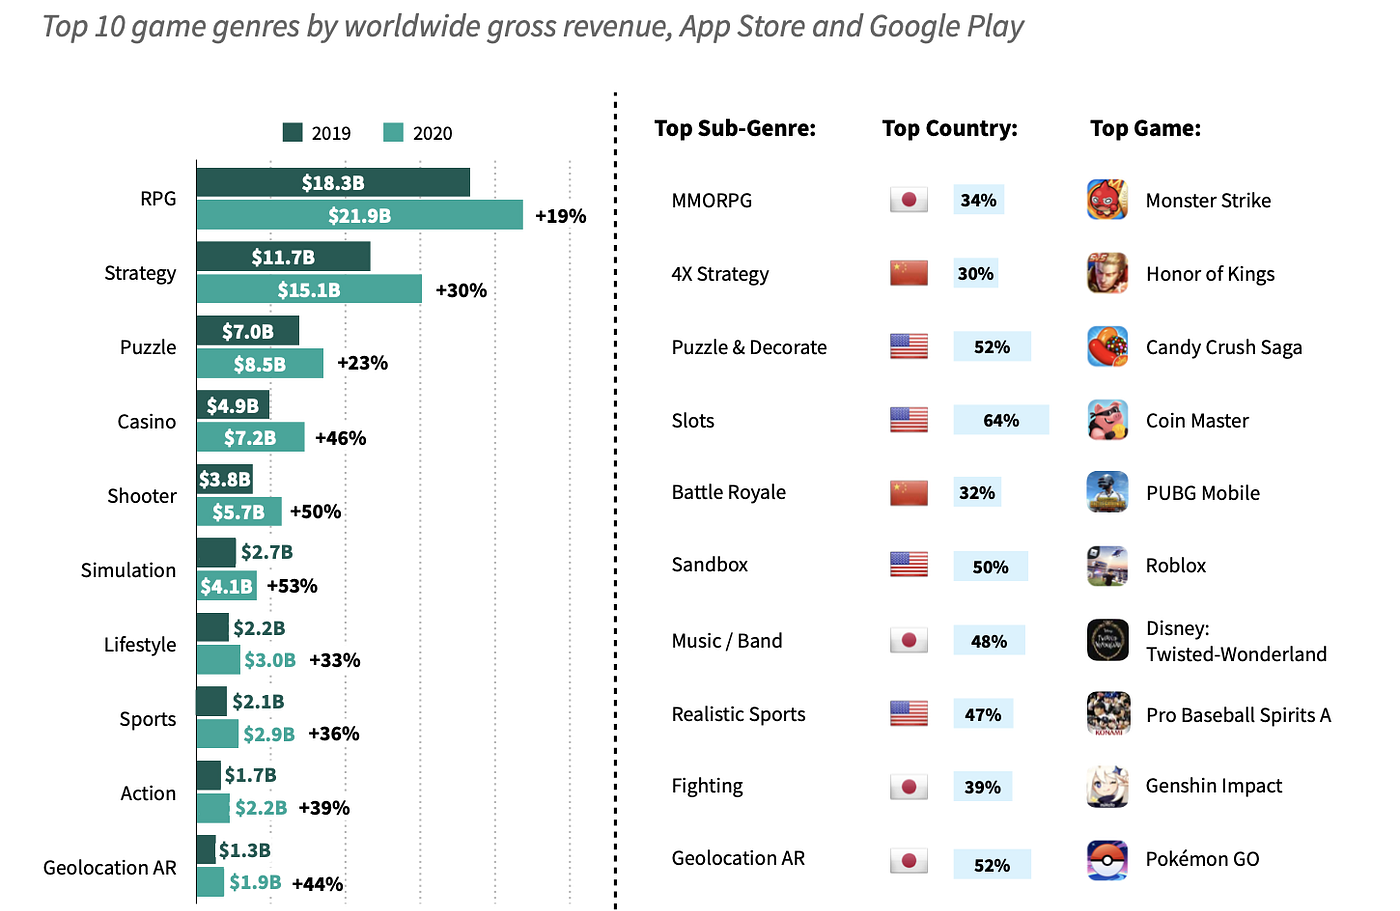 (Source: https://www.adcolony.com/blog/2021/06/07/breaking-down-the-mobile-gaming-trends-of-2021/)